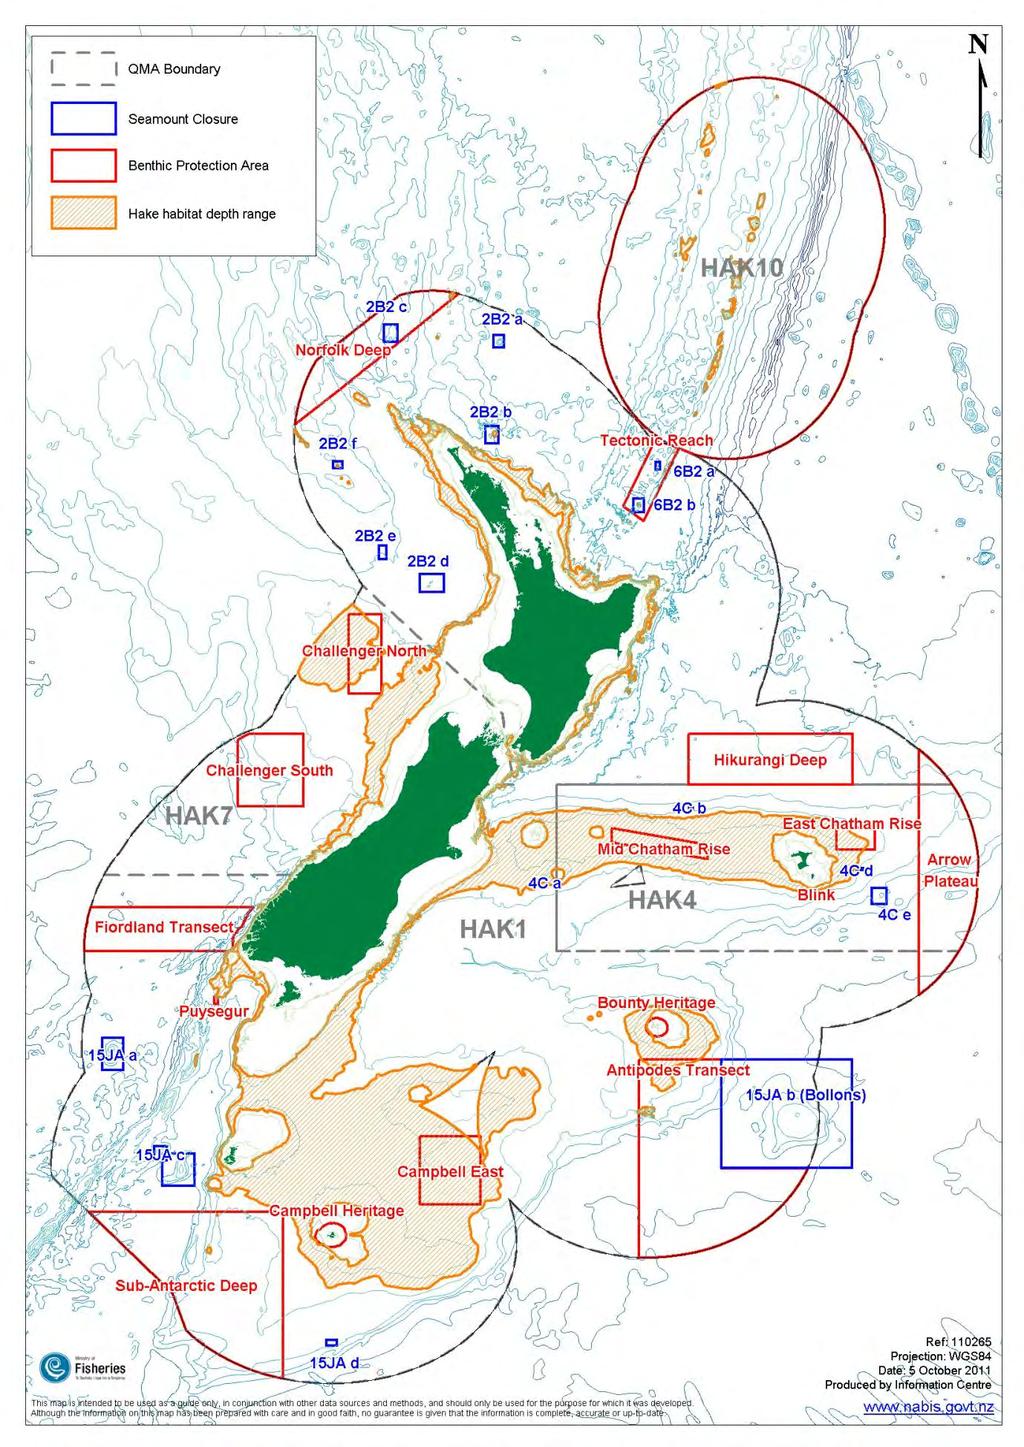 Figure 7: The areas of hake habitat currently closed to bottom